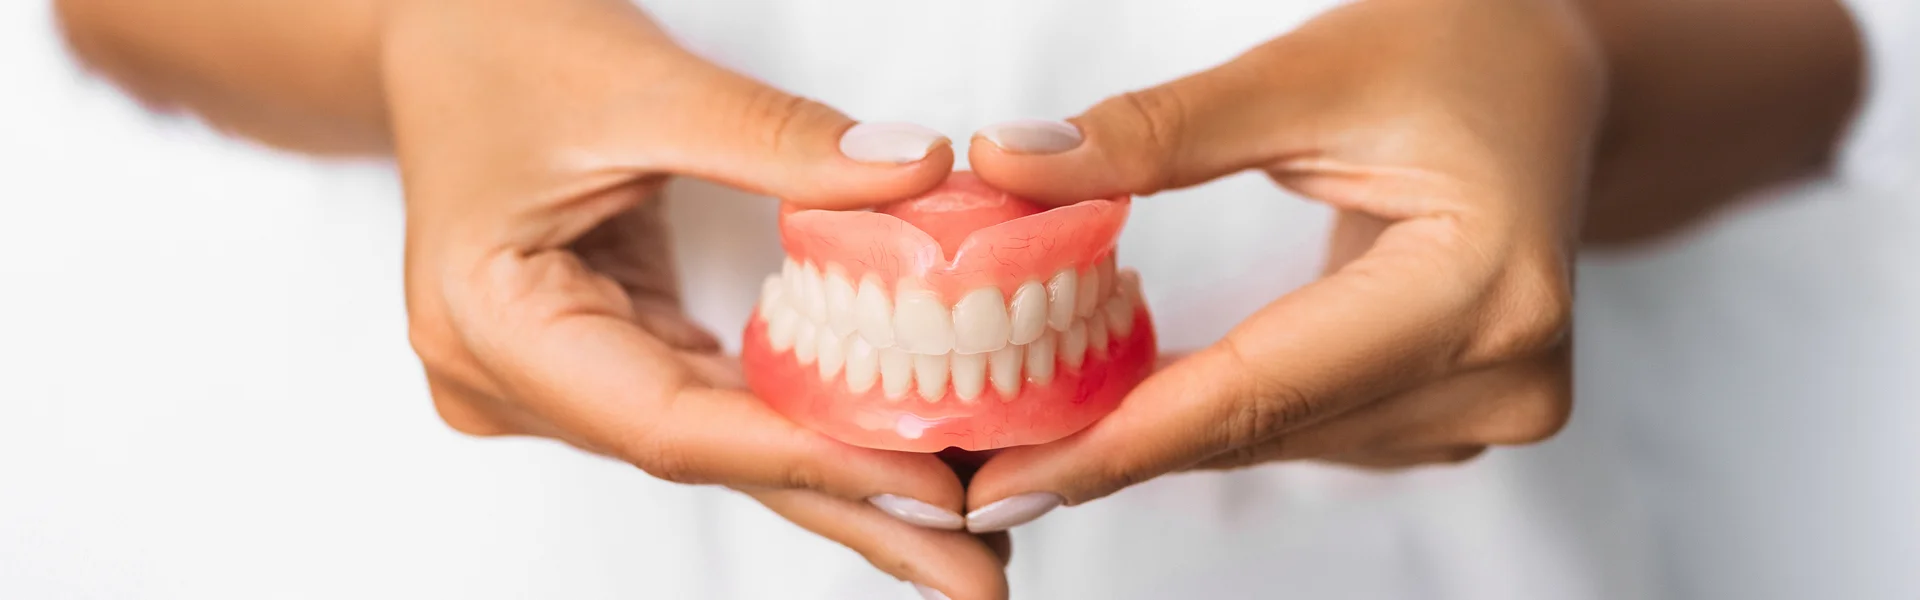 Tips For Pain Management After Getting New Dentures